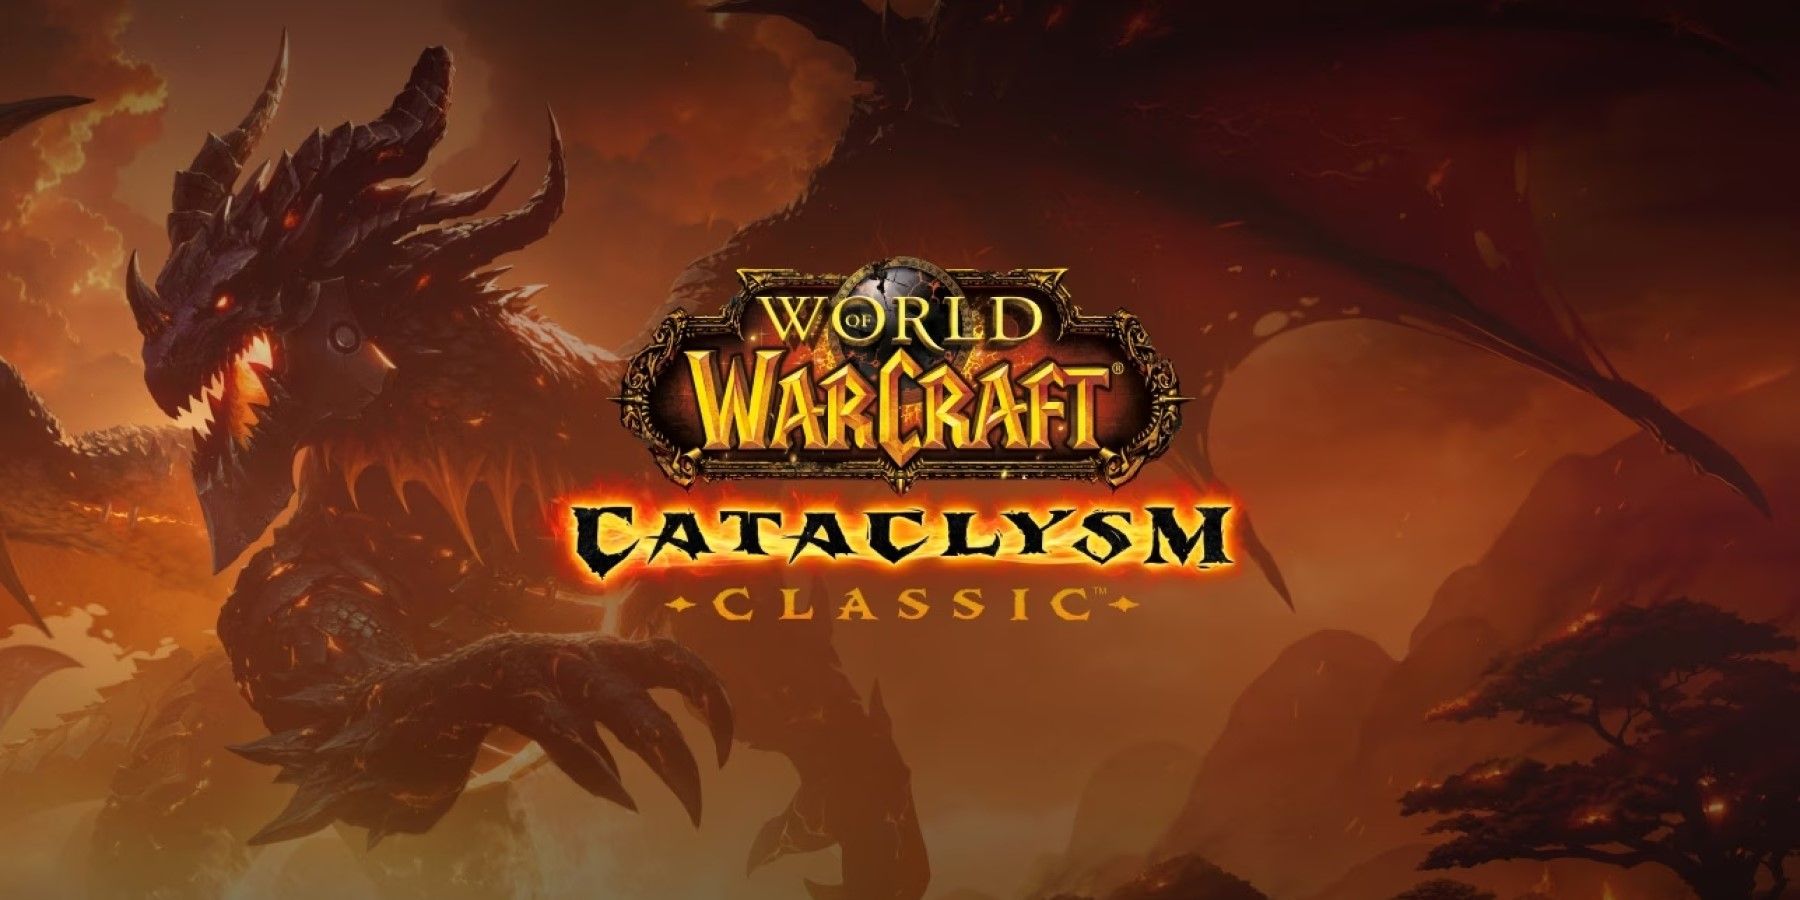 deathwing from the wow cata classic key art with the logo